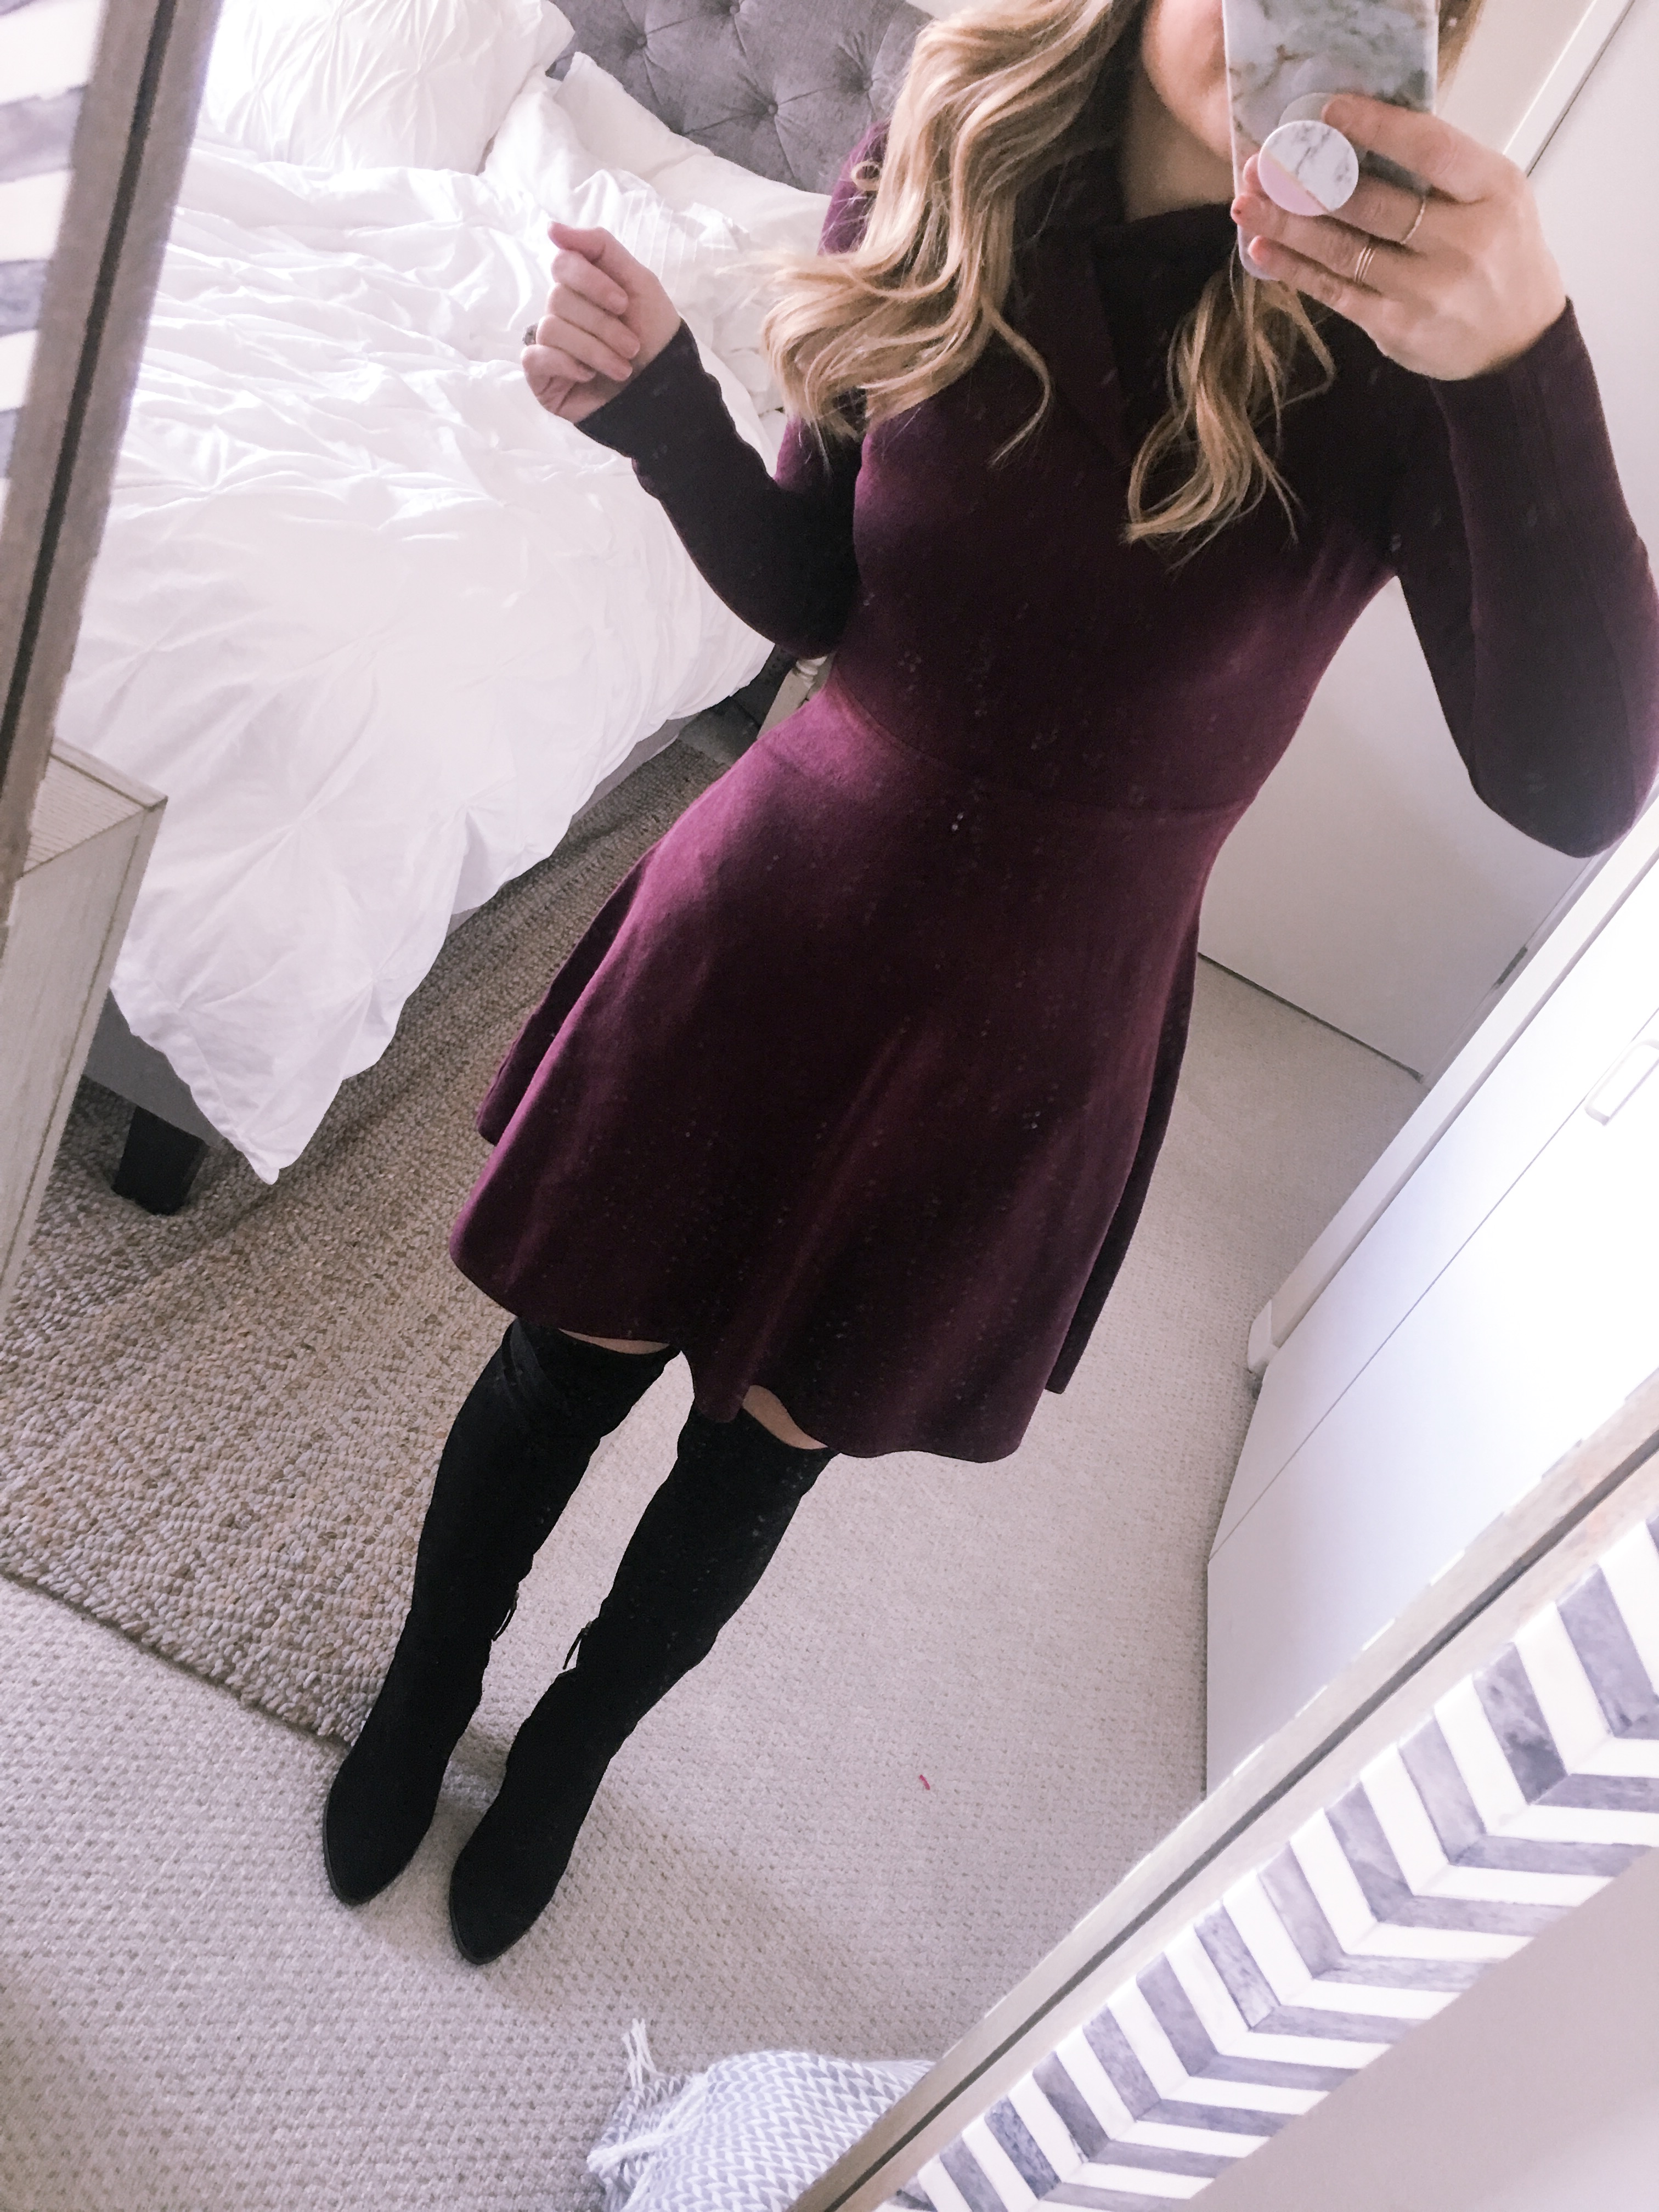 Eliza J tie Neck Fit and Flare Dress in Burgundy for the office - OOTD 12.7.17: Burgundy Midi Dress & OTK Boots by Chicago style blogger Visions of Vogue